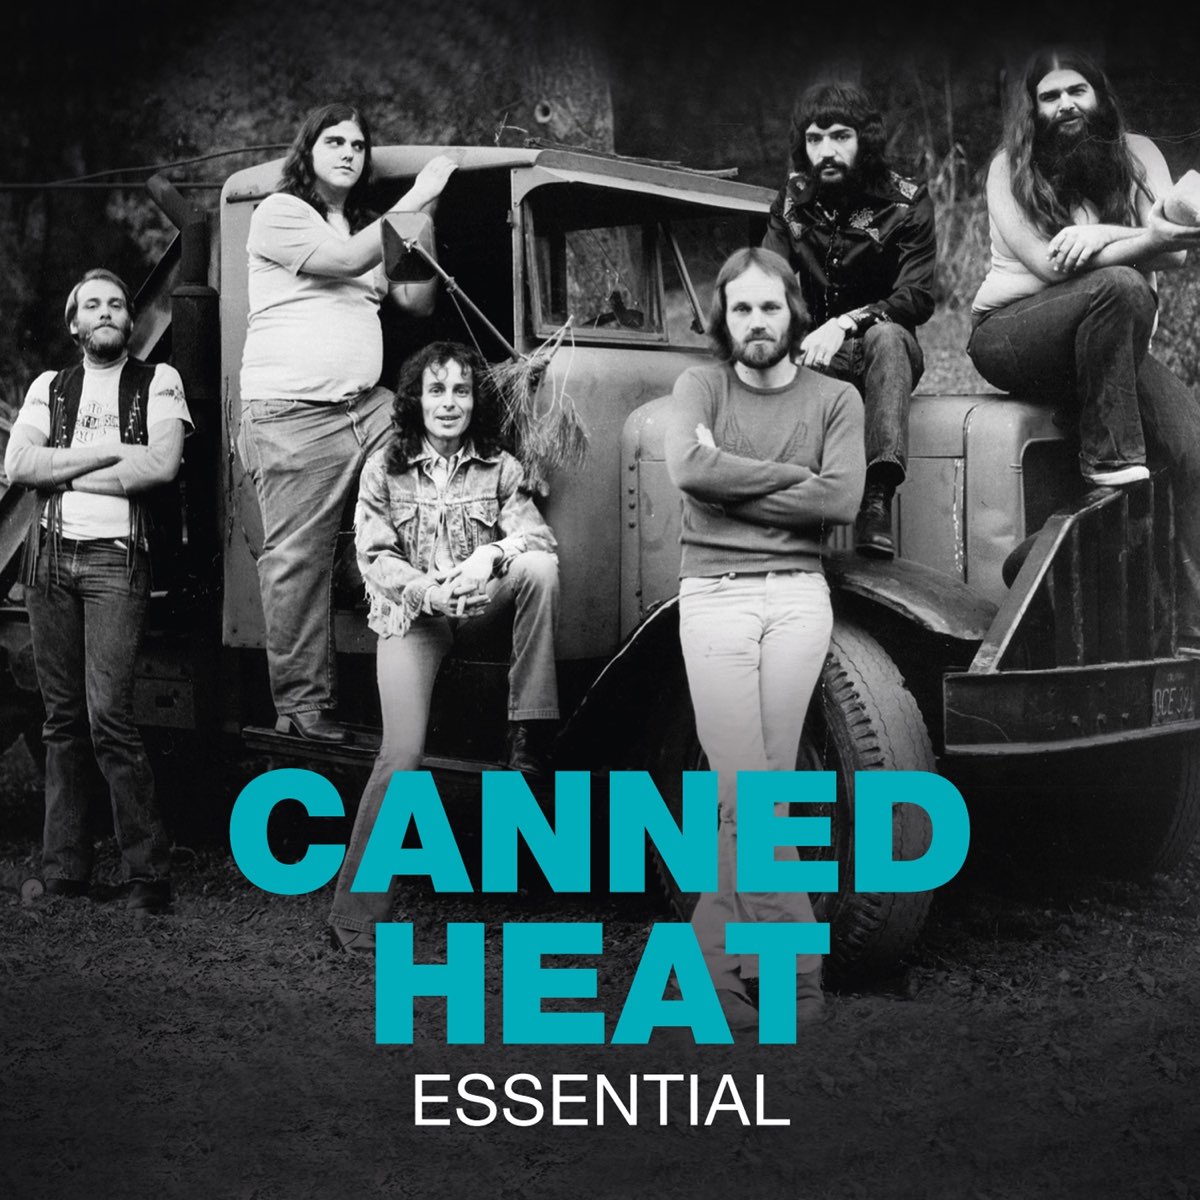 Canned heat steam фото 60